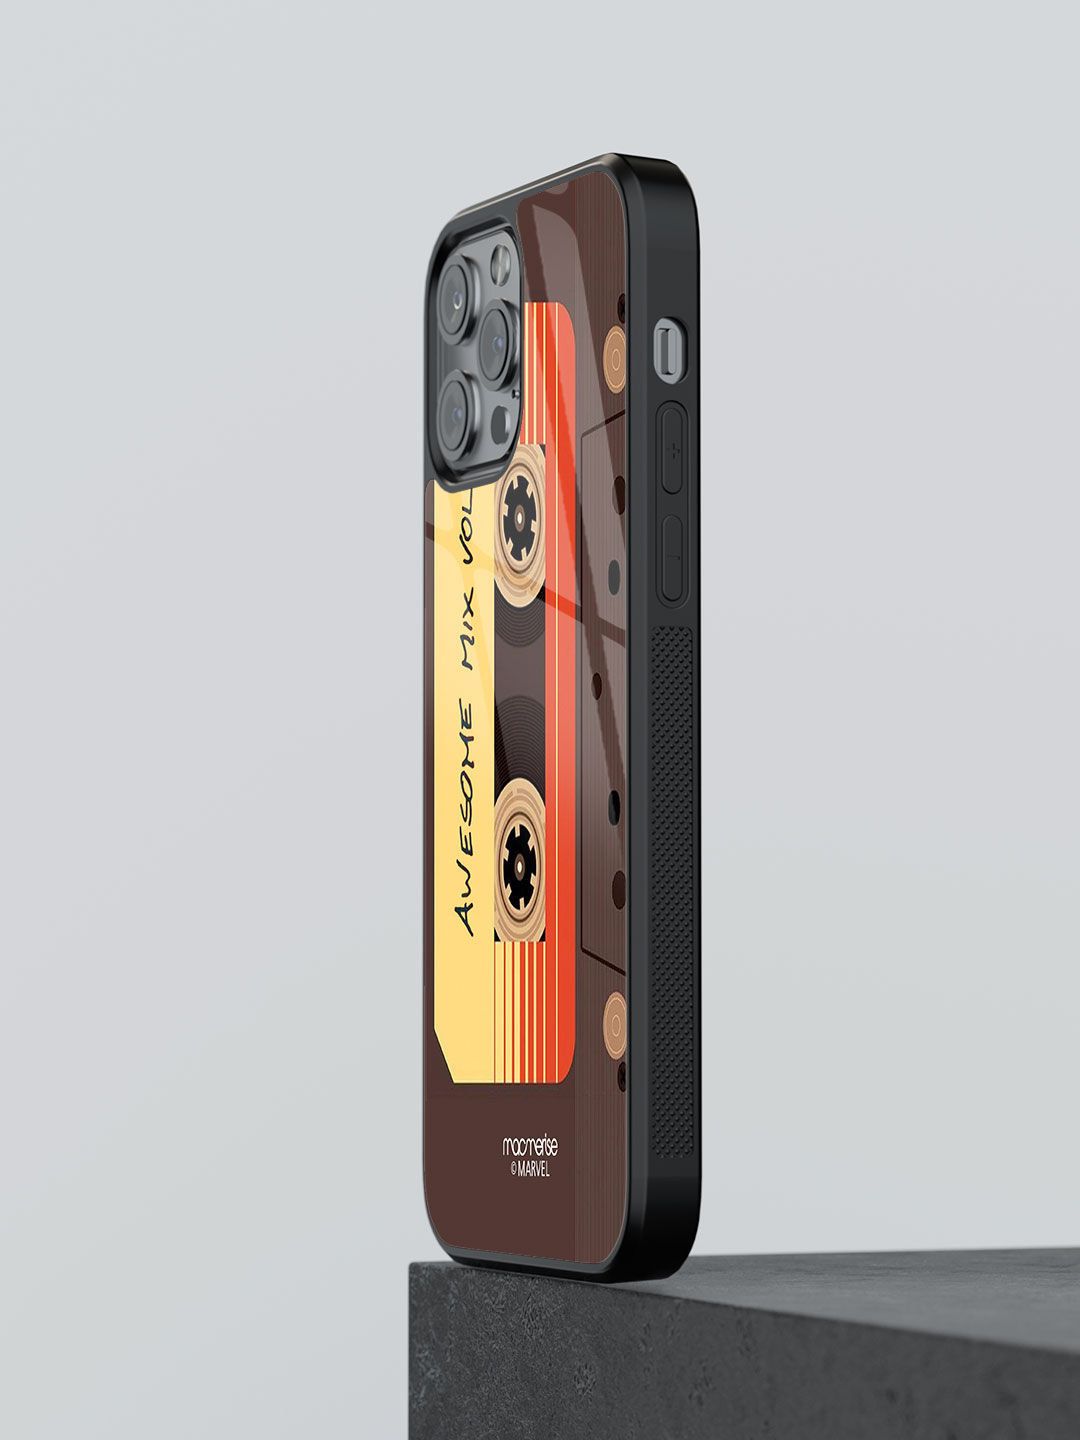 macmerise Black & Yellow Printed Iphone 13 Pro Max Glass Mobile Case Price in India